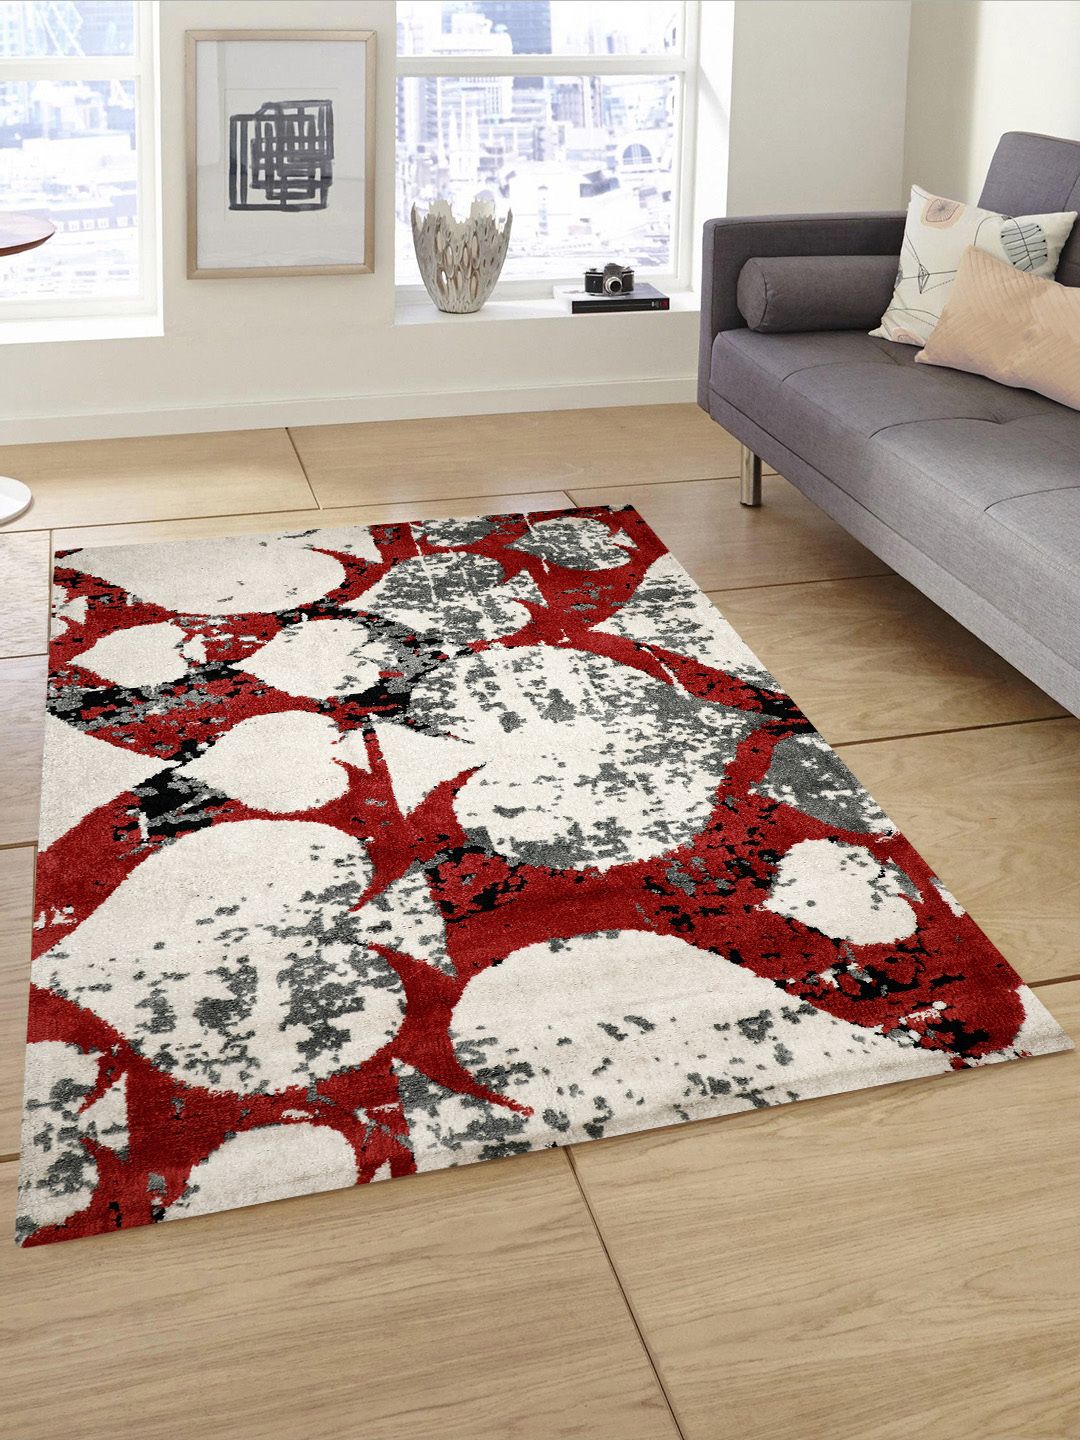 PRESTO Red & Off White Patterned Heavy Shaggy Anti-Skid Wool Carpet Price in India